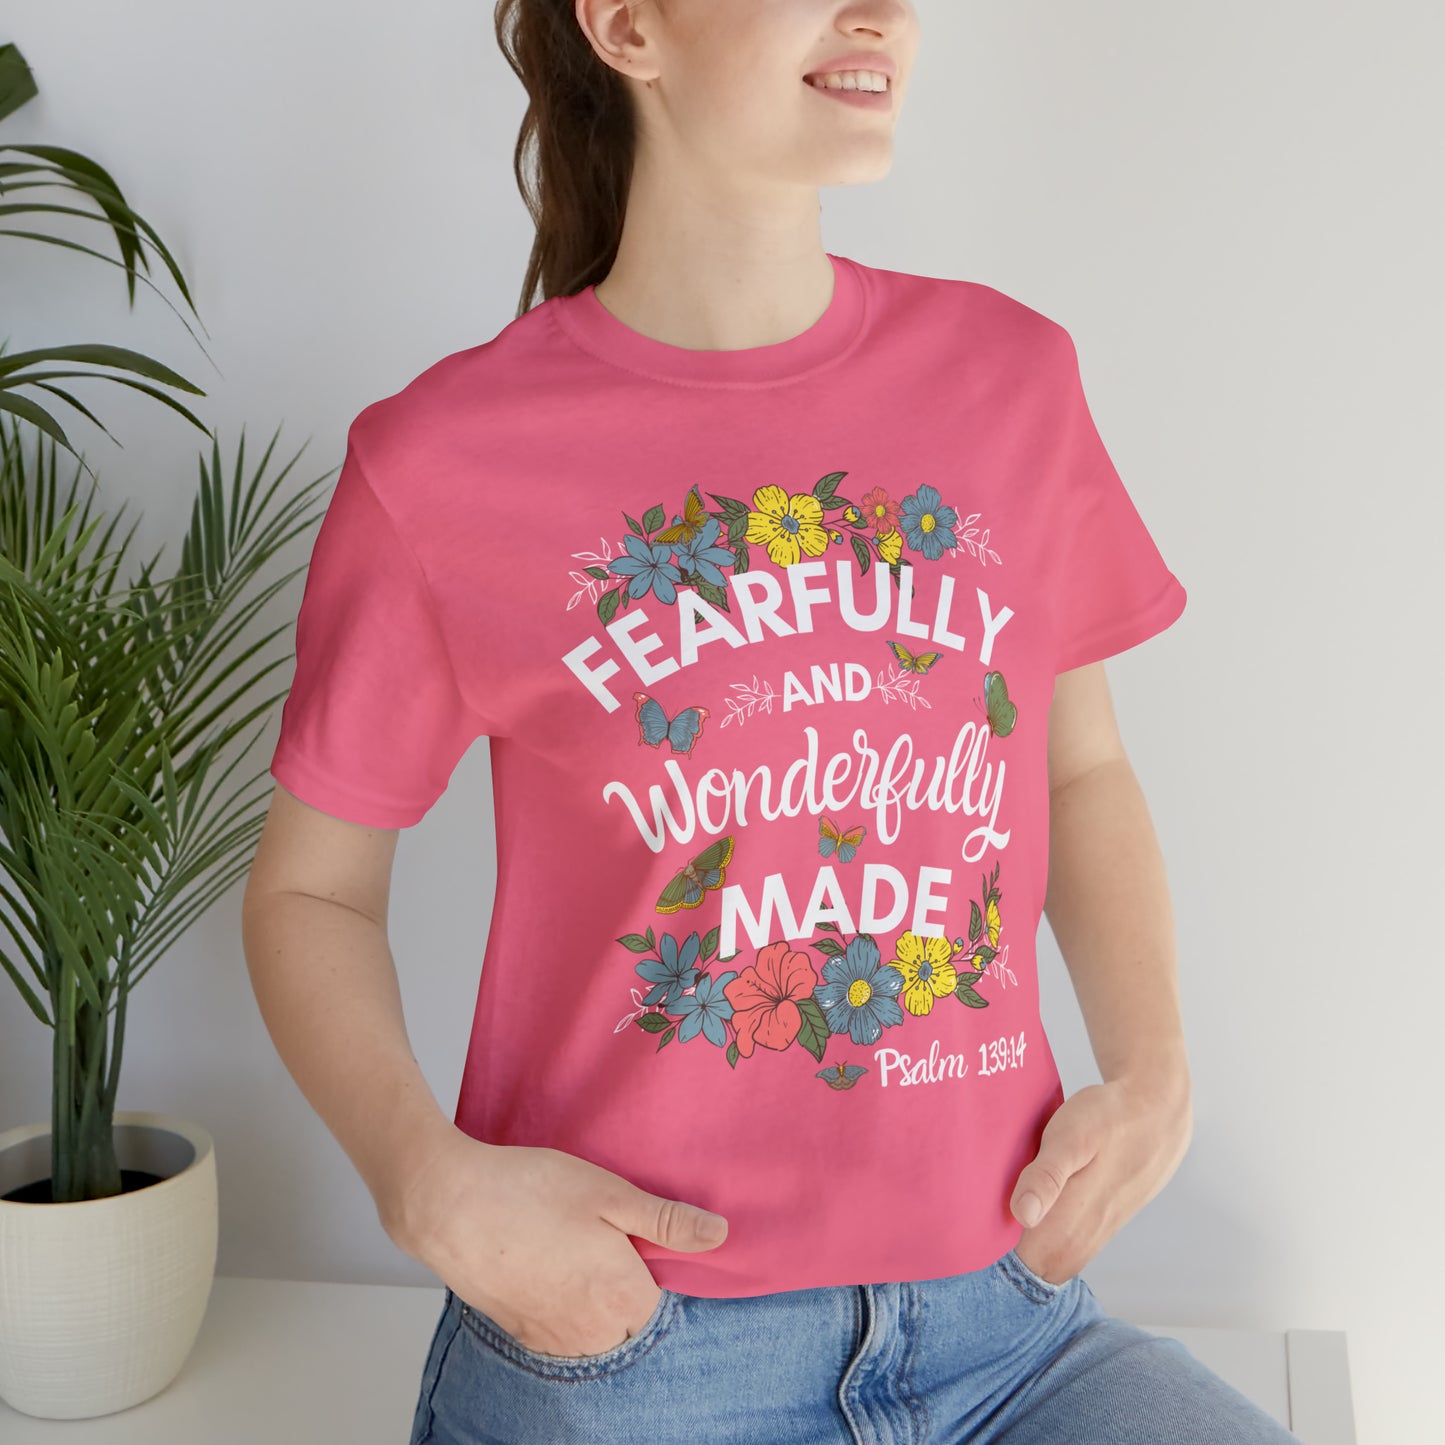 Fearfully and Wonderfully Made (Green Pastures Apparel)